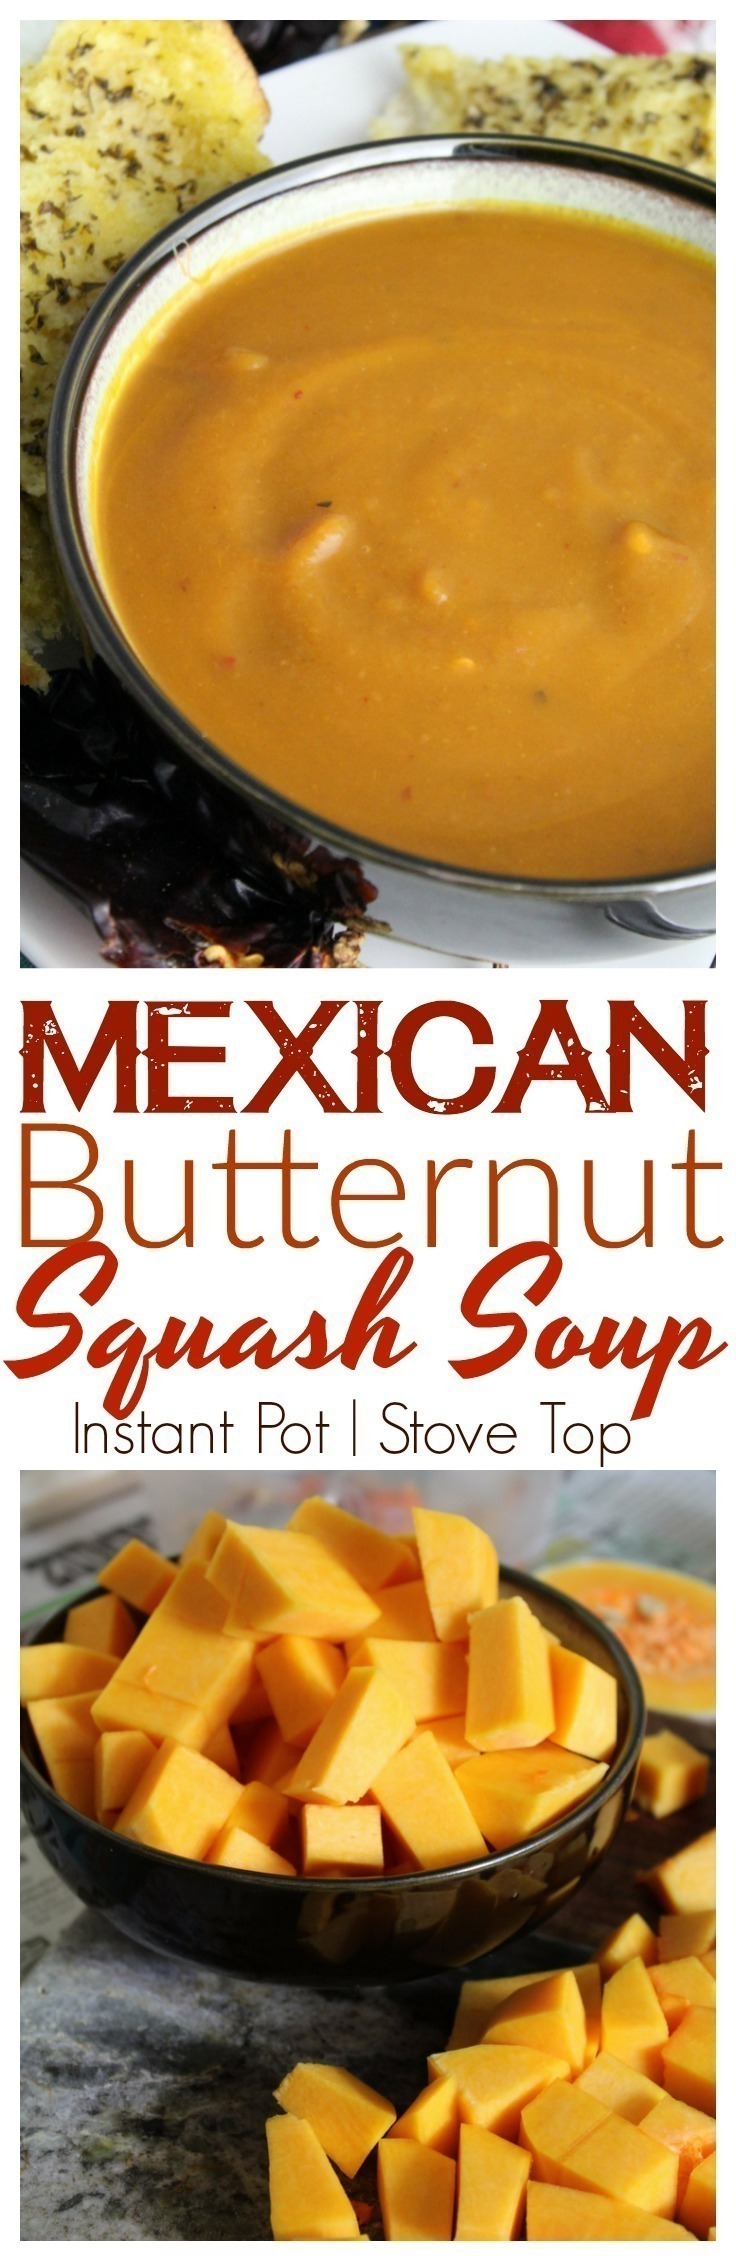 New Mexico or Ancho Chiles add tremendous flavor to this rich, and warm bowl of Mexican Butternut Squash Soup, made easily in the Instant Pot or on the stove top.